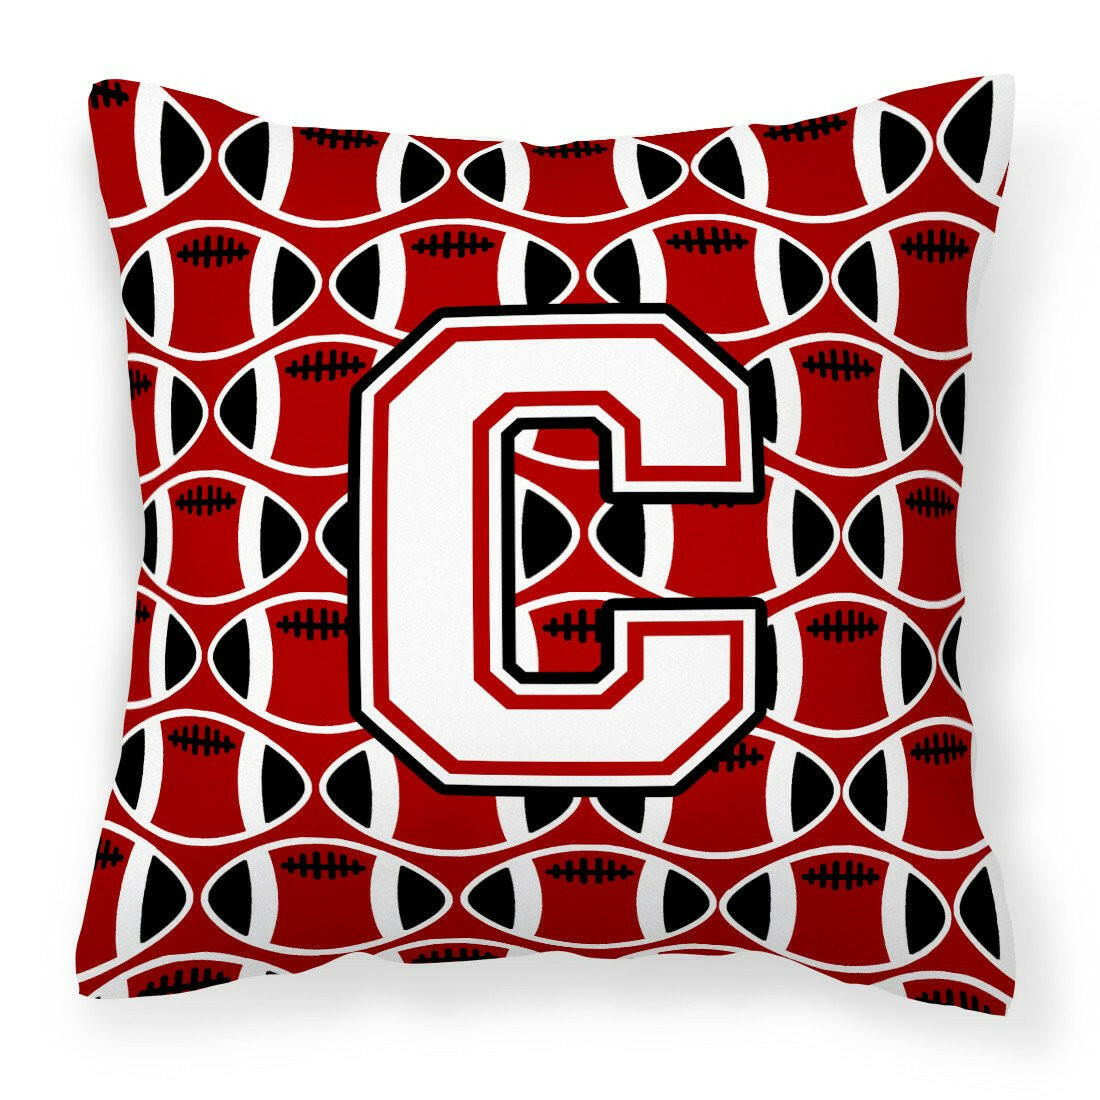 Letter C Football Cardinal and White Fabric Decorative Pillow CJ1082-CPW1414 by Caroline's Treasures